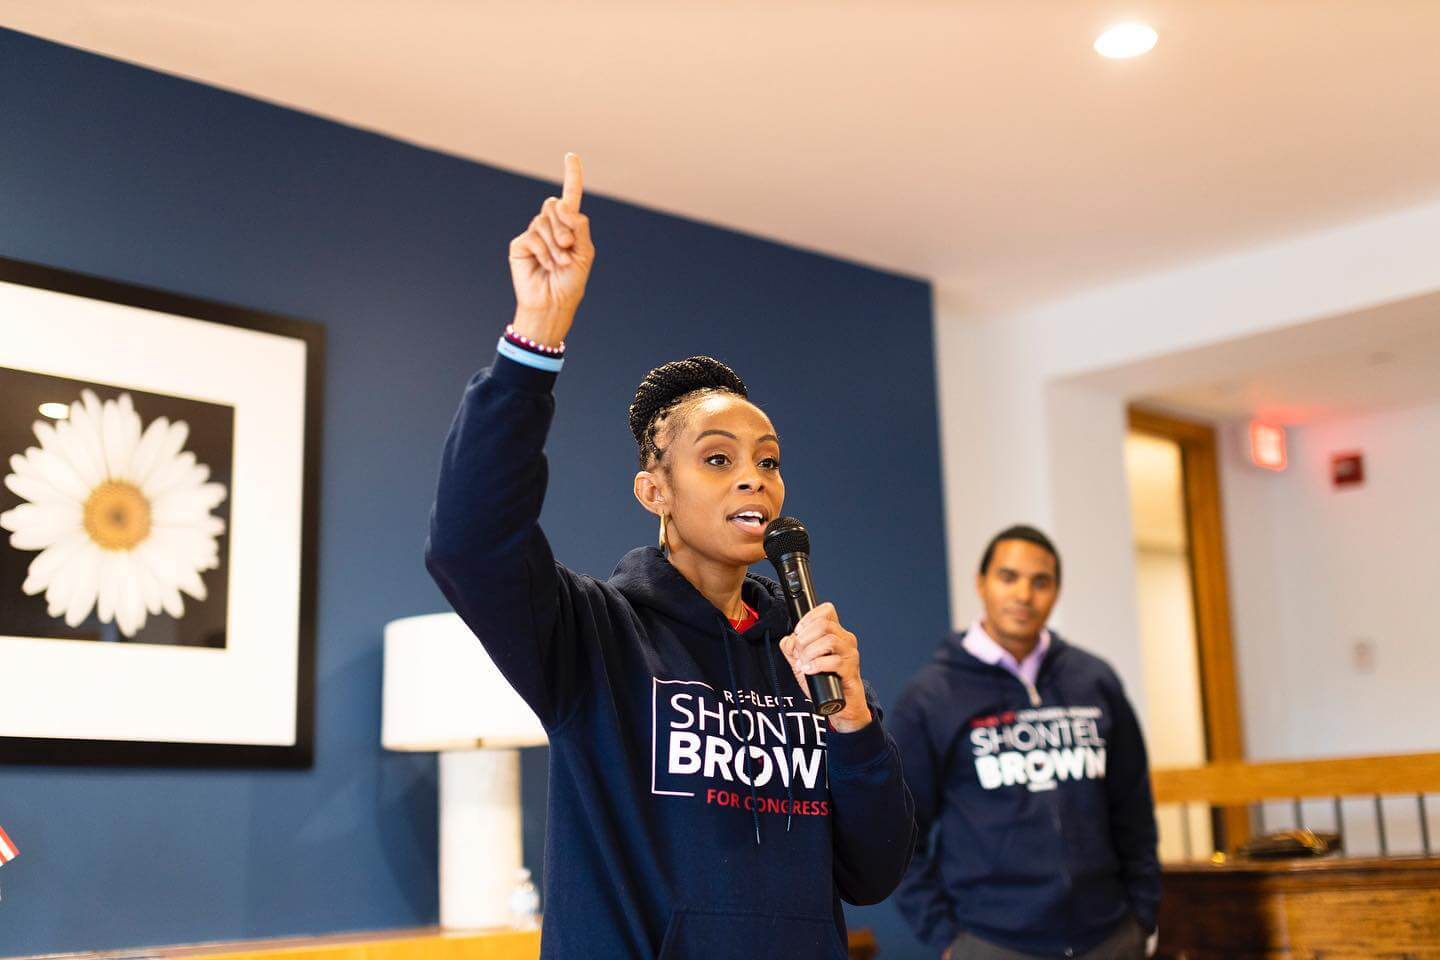 Rep. Shontel Brown campaigns with Rep. Ritchie Torres in Cleveland, Ohio on Saturday, April 30, 2022